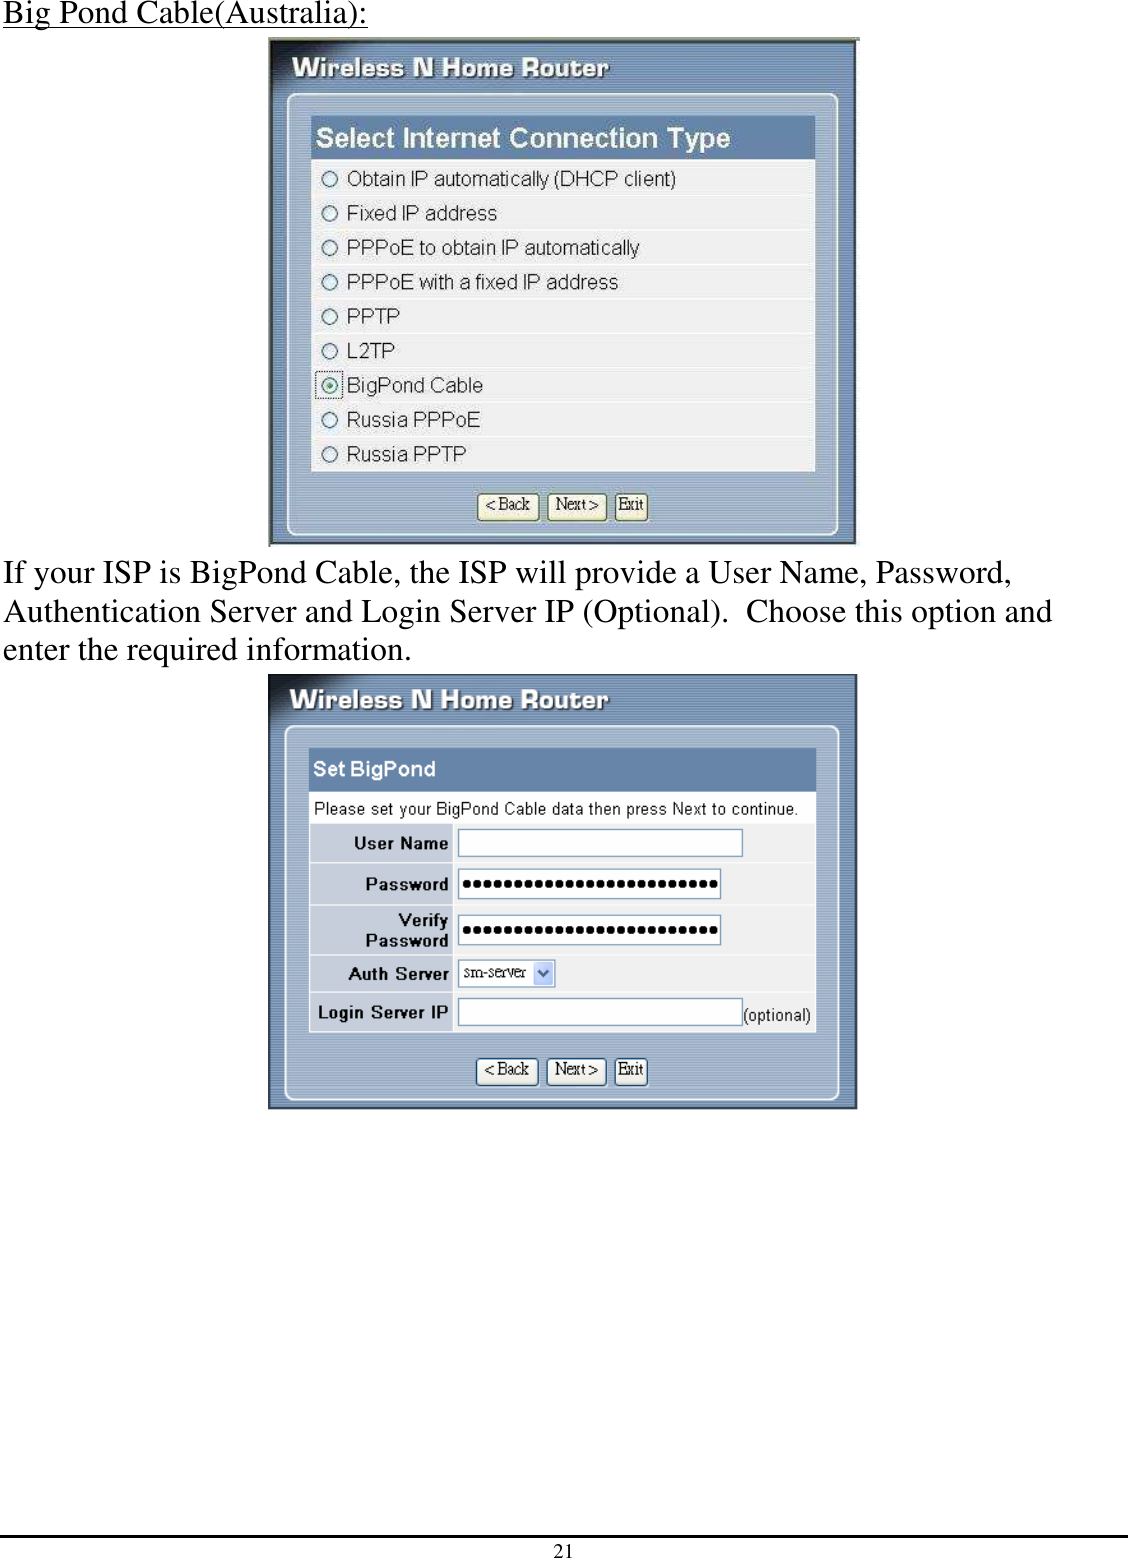 21 Big Pond Cable(Australia):  If your ISP is BigPond Cable, the ISP will provide a User Name, Password, Authentication Server and Login Server IP (Optional).  Choose this option and enter the required information.   